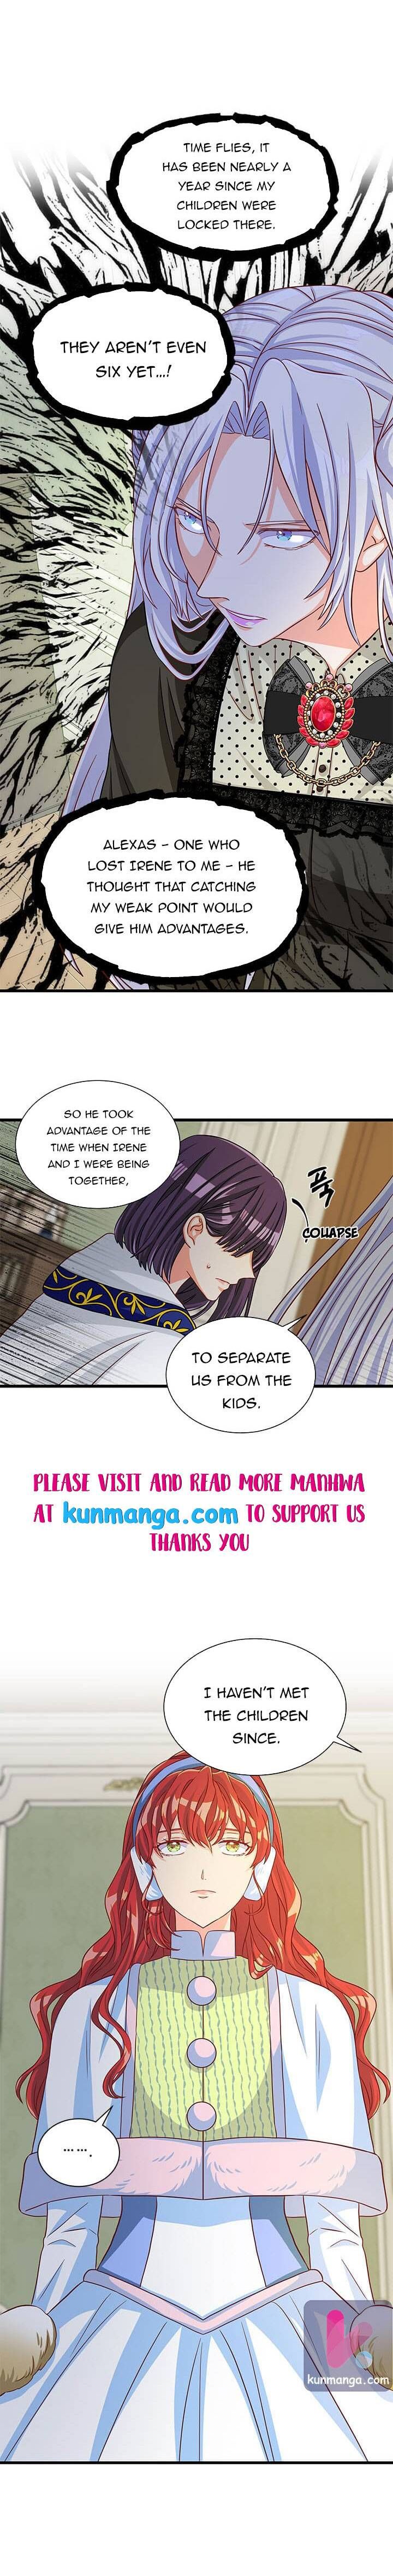 Priscilla's Marriage Request Chapter 71.5 page 2